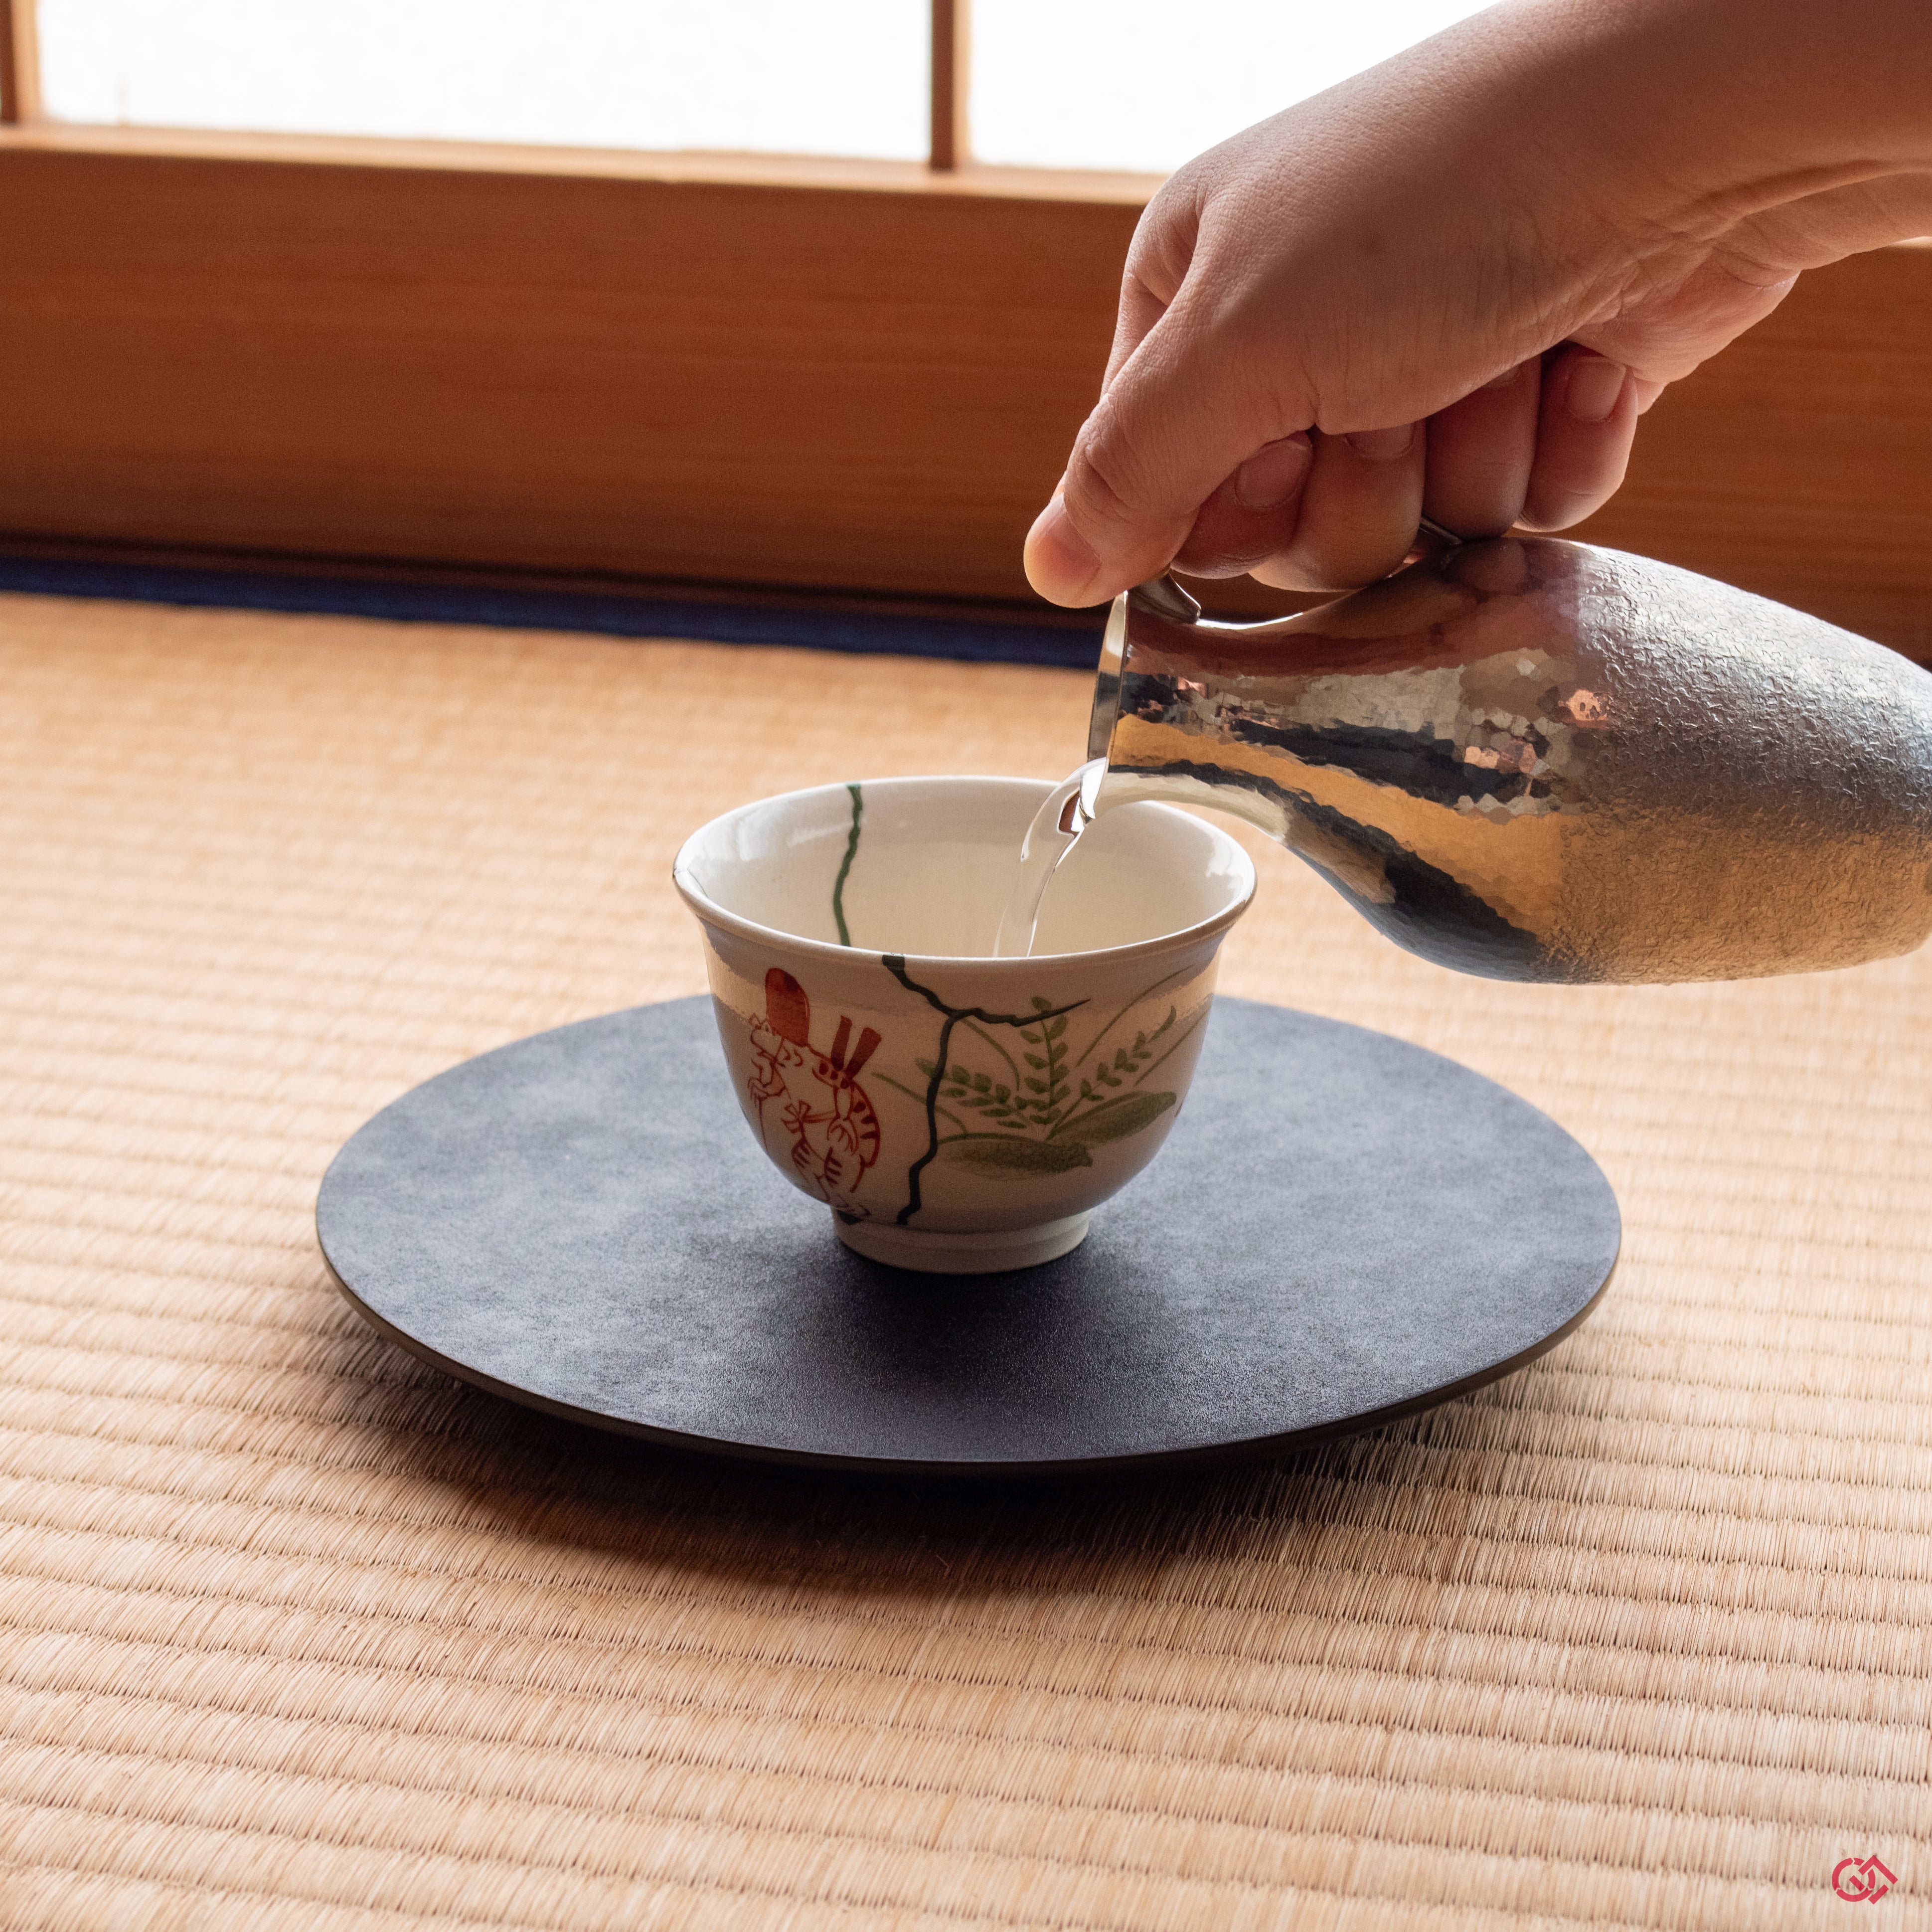 Photo of an authentic Kintsugi pottery piece being used in a real-world setting, such as a cup of sake being poured into a Kintsugi cup.